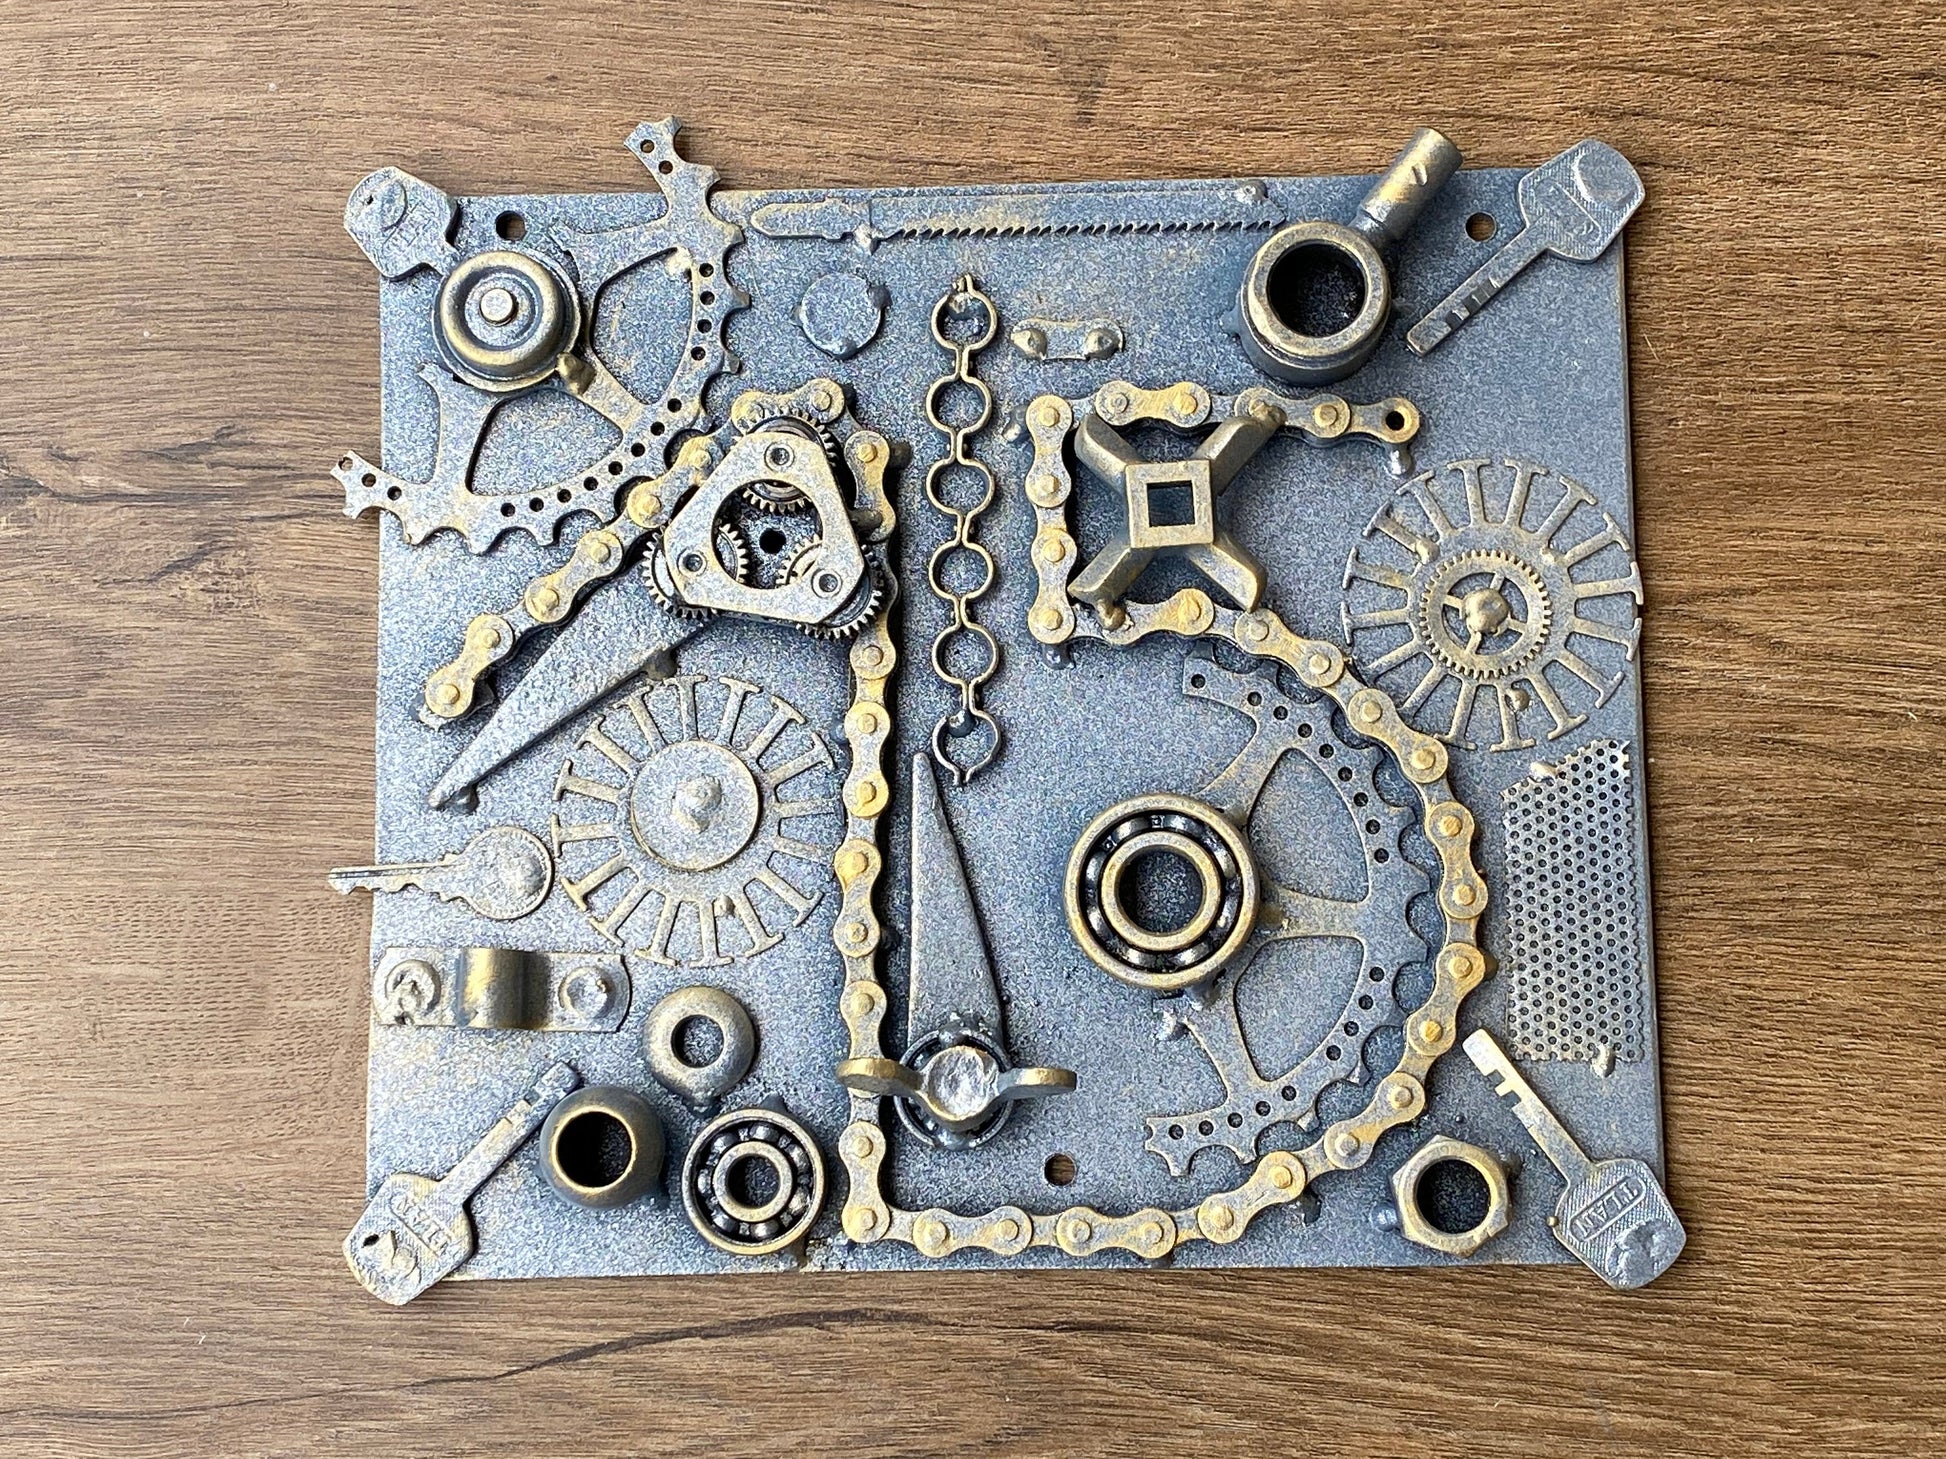 Steampunk plate, steampunk plaque, steampunk sign, mailbox, house number plaque, industrial decor, house numbers, metal numbers, sign,plaque